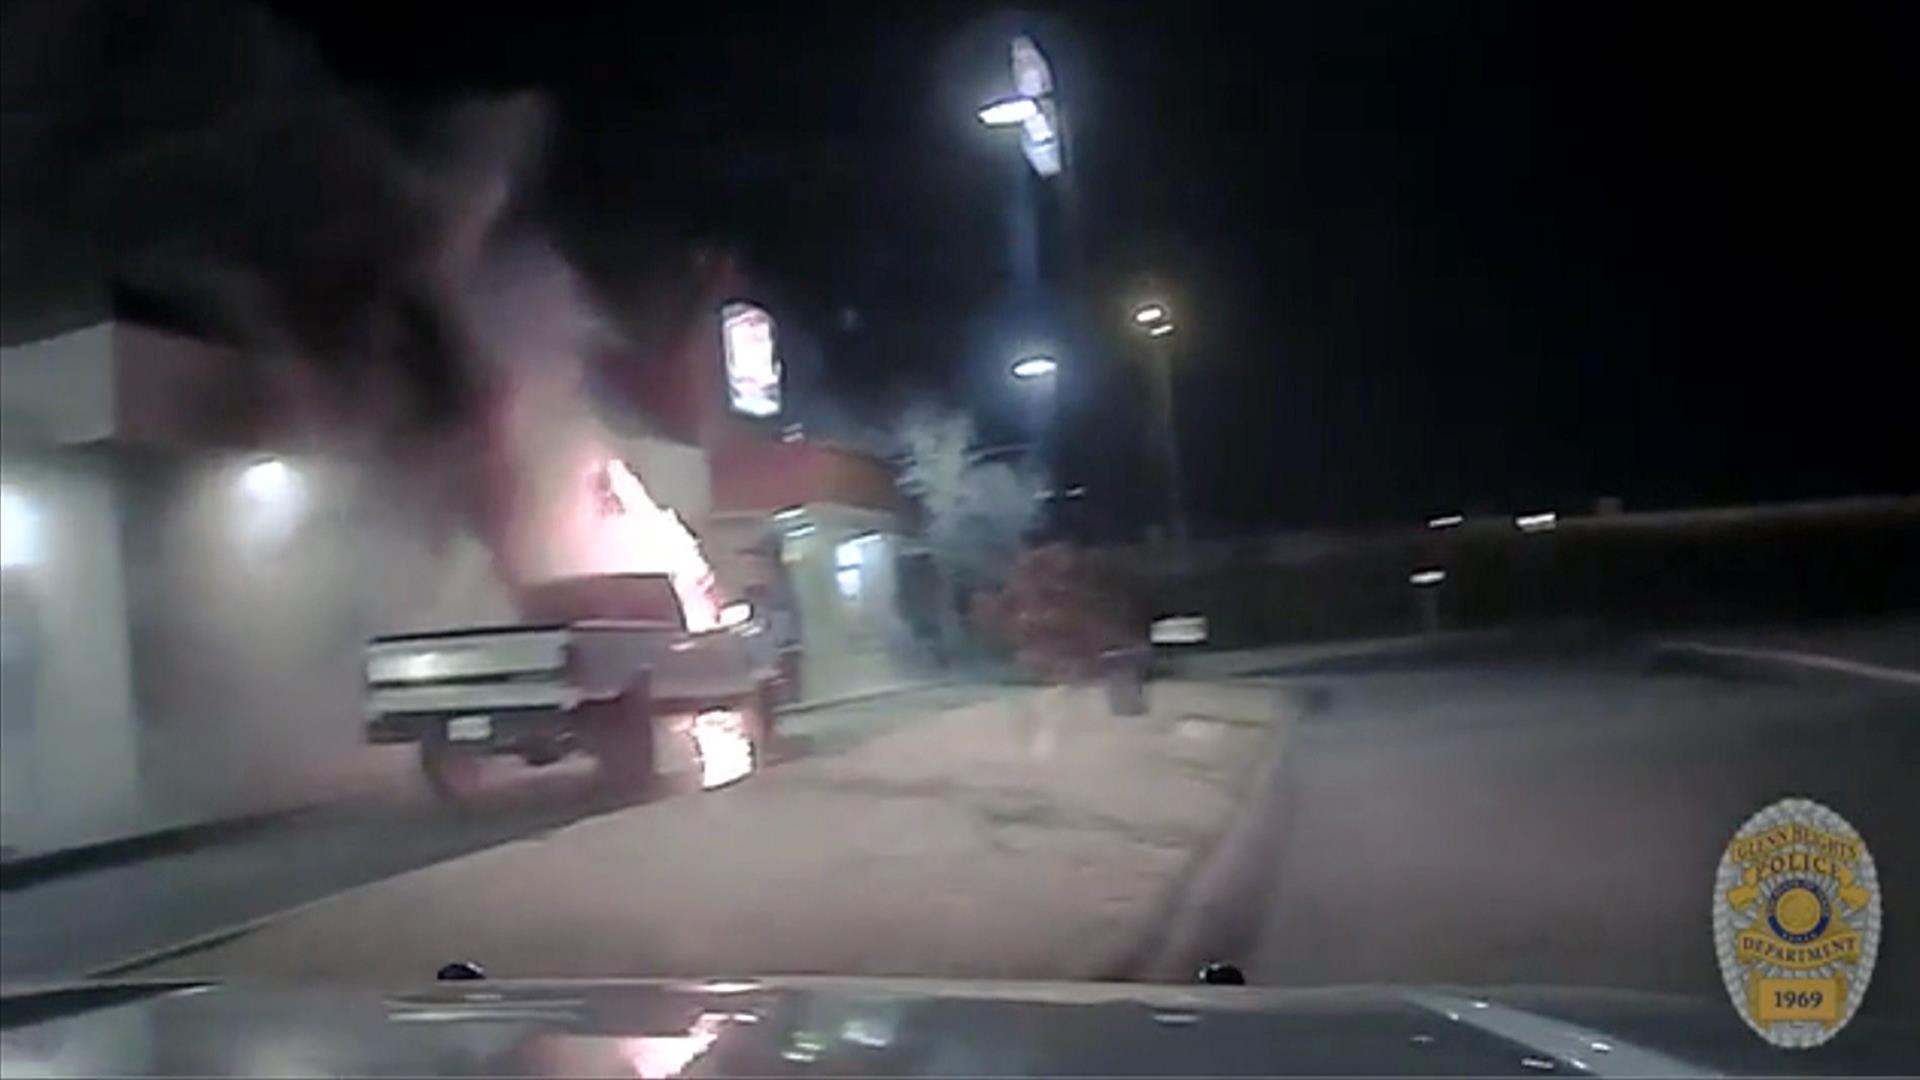 Watch courageous police officer cleverly move flame-engulfed truck